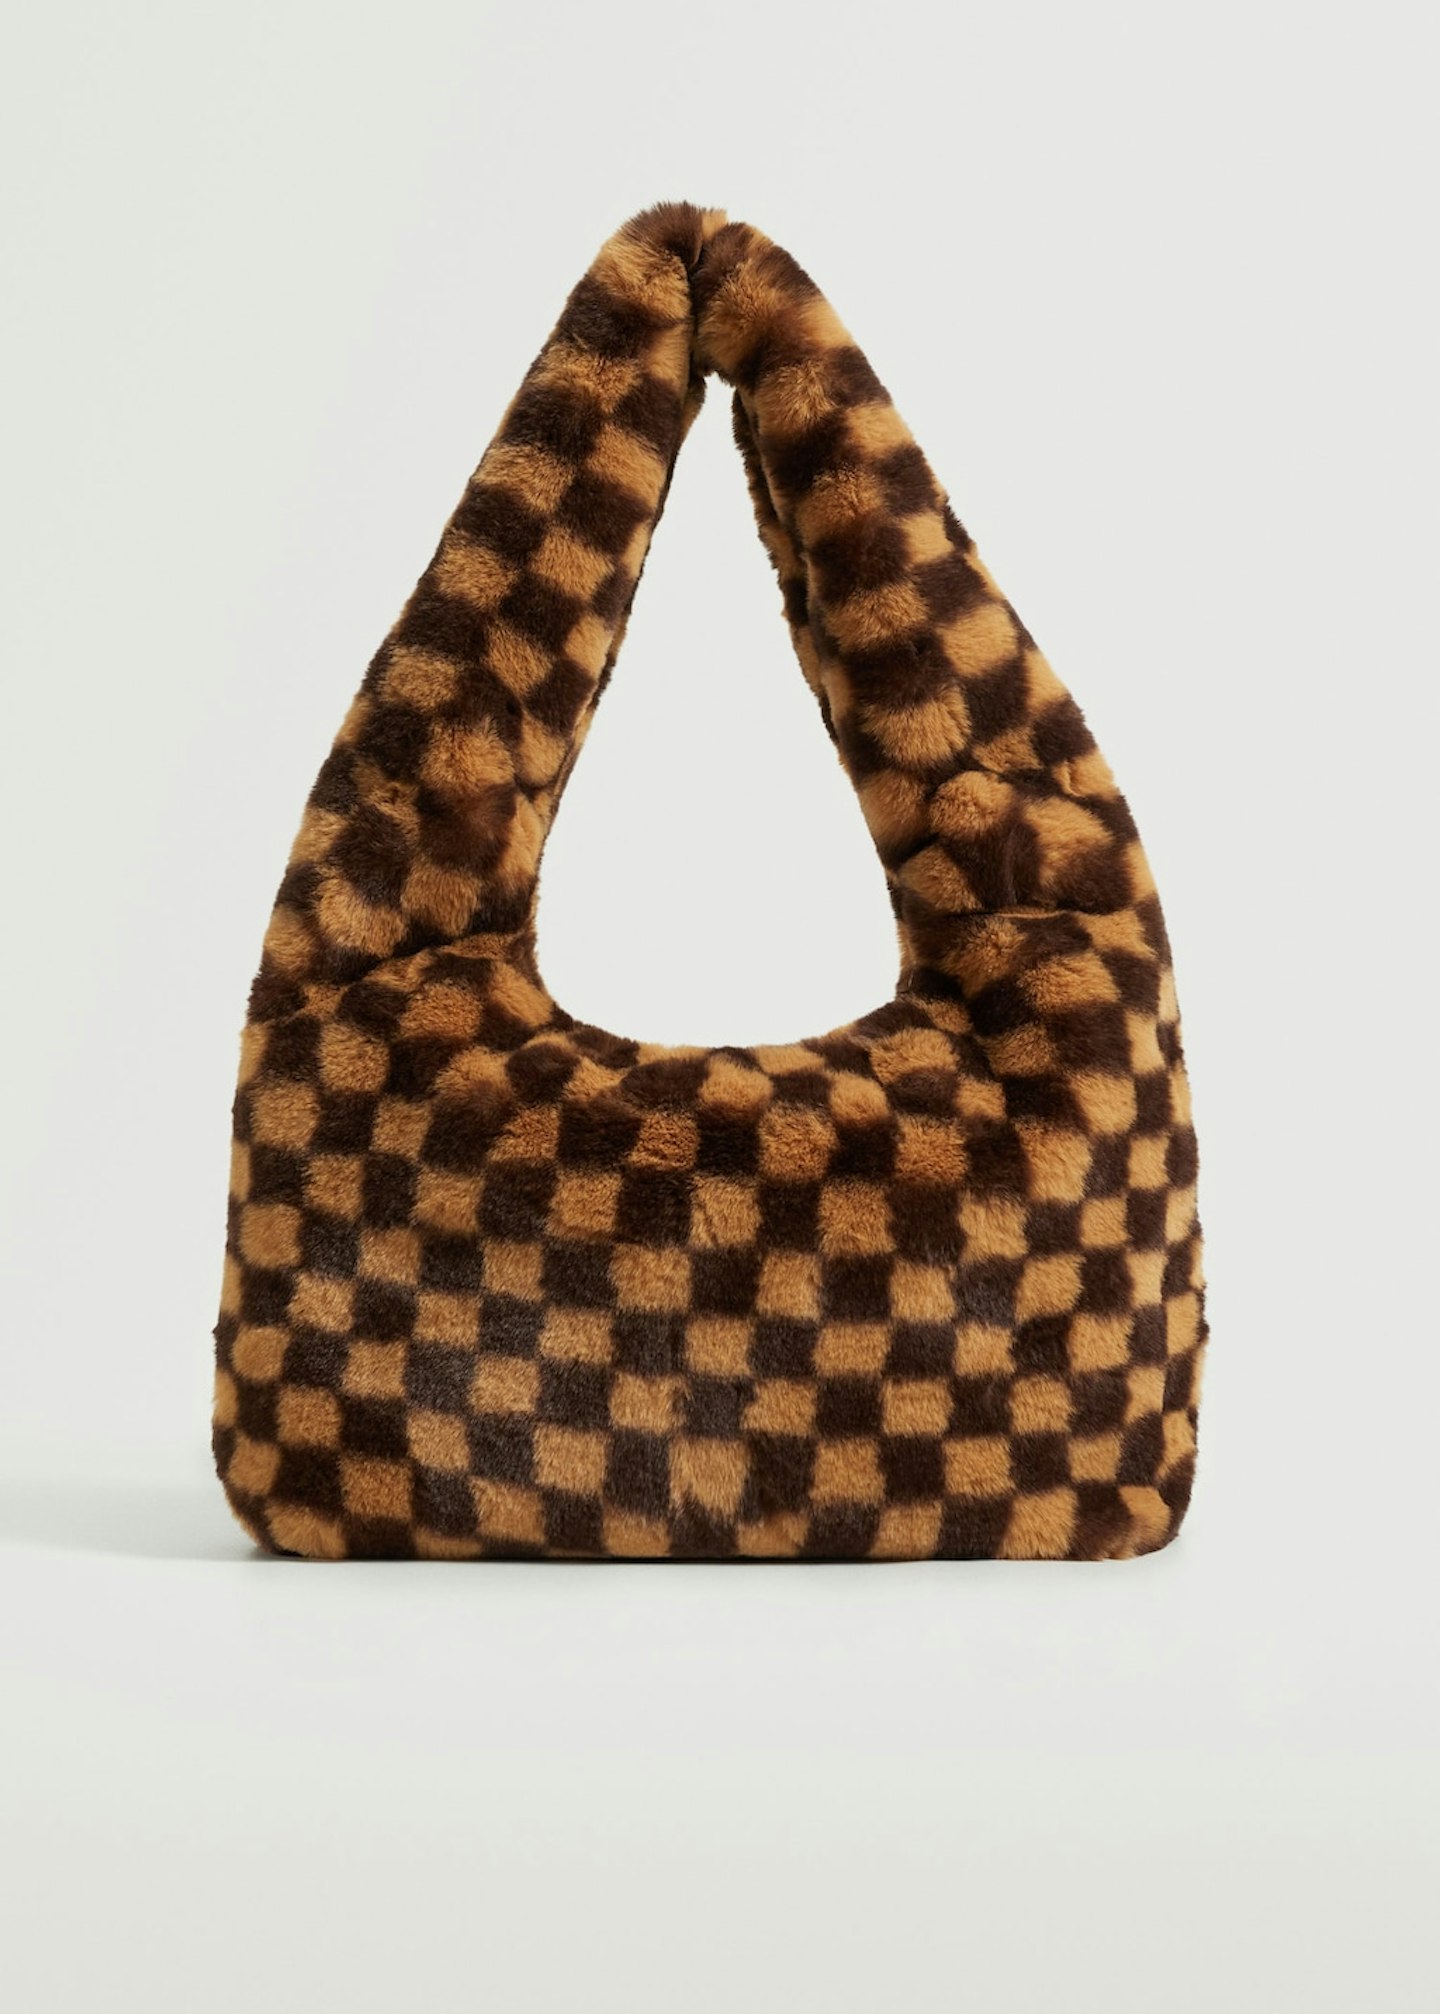 Checked Fur Bag, WAS £49.99 NOW £39.99